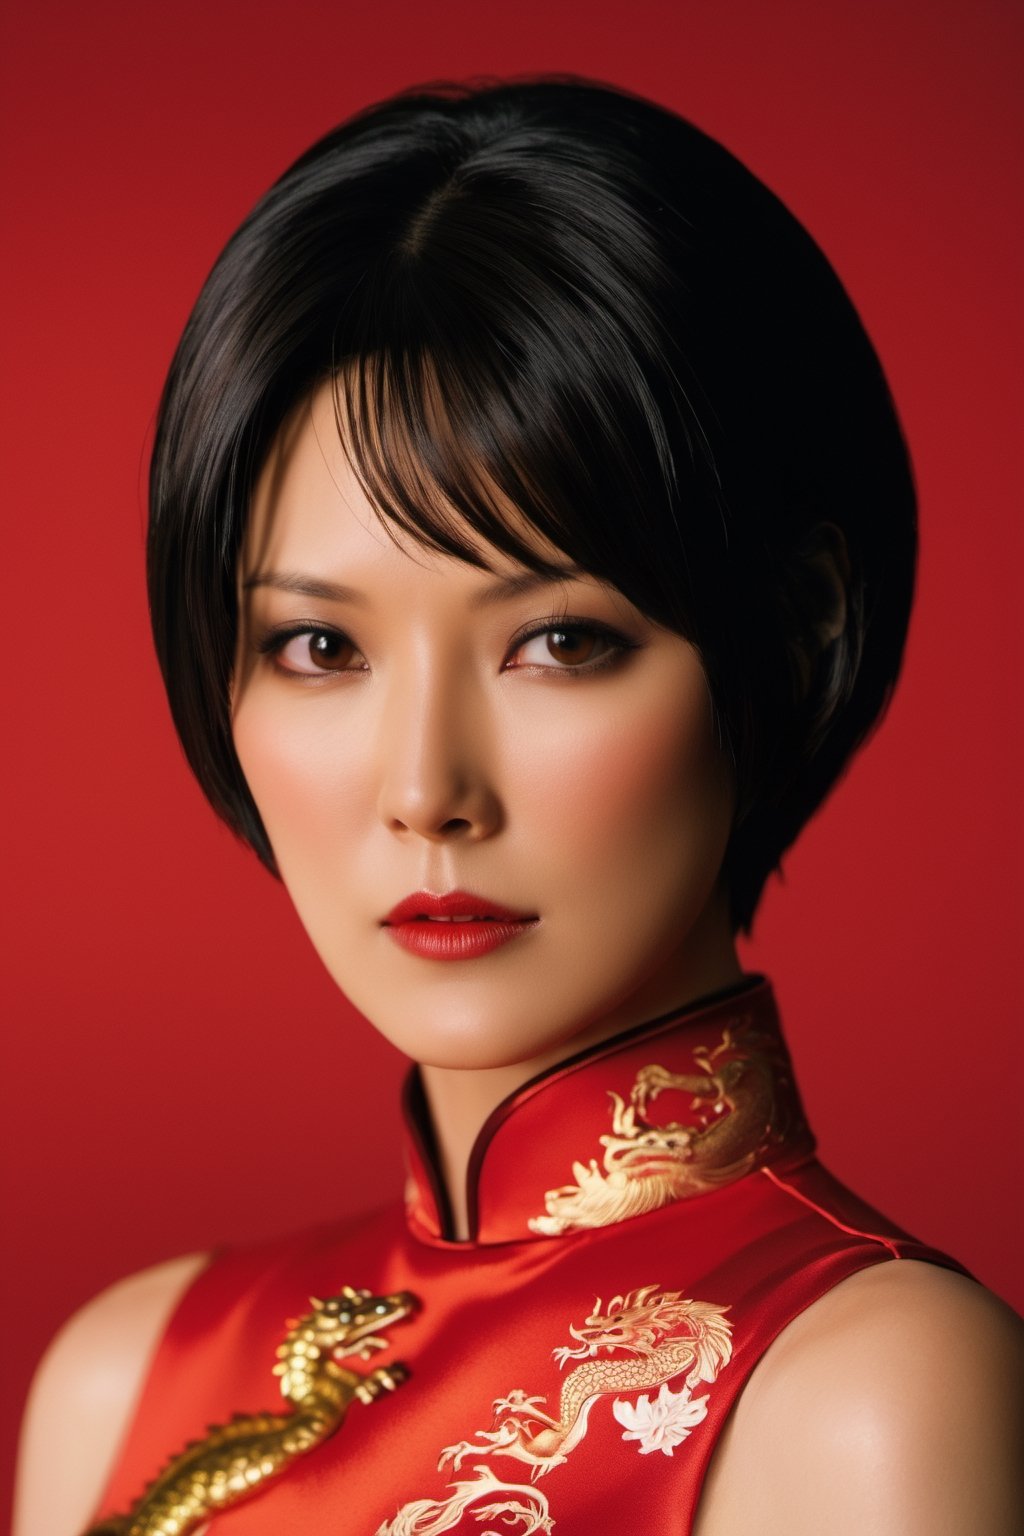 resident evil ada wong, wearing red cheongsam with dragon emble